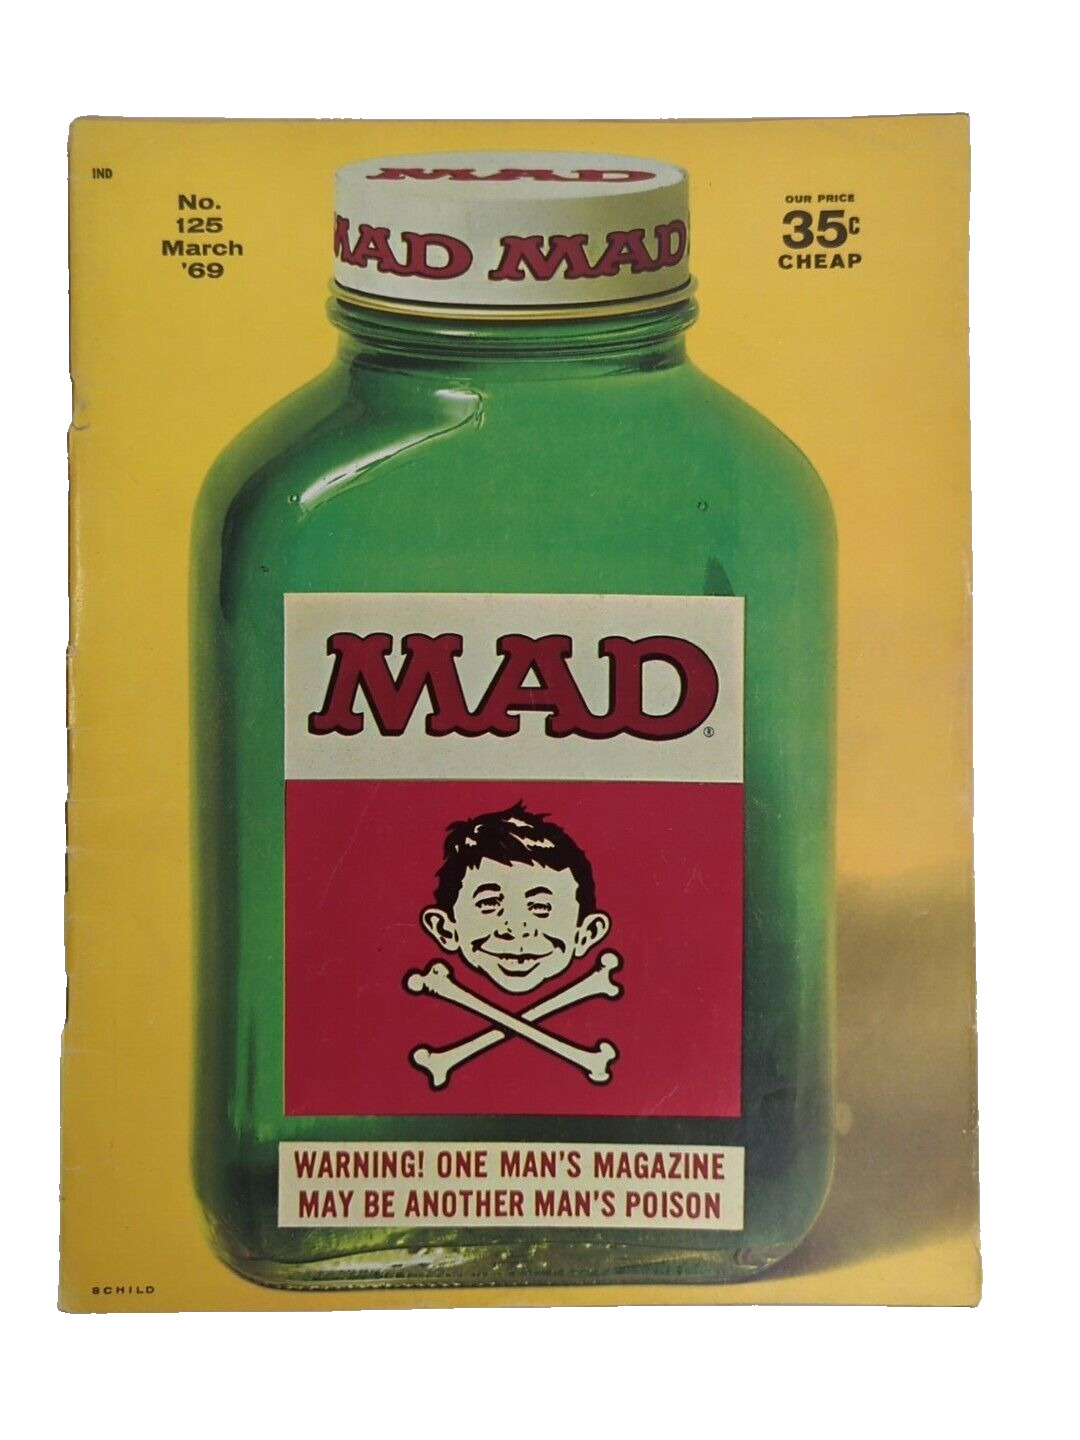 Vintage MAD MAGAZINE Issue # 125 March 1969 Poison Bottle Cover